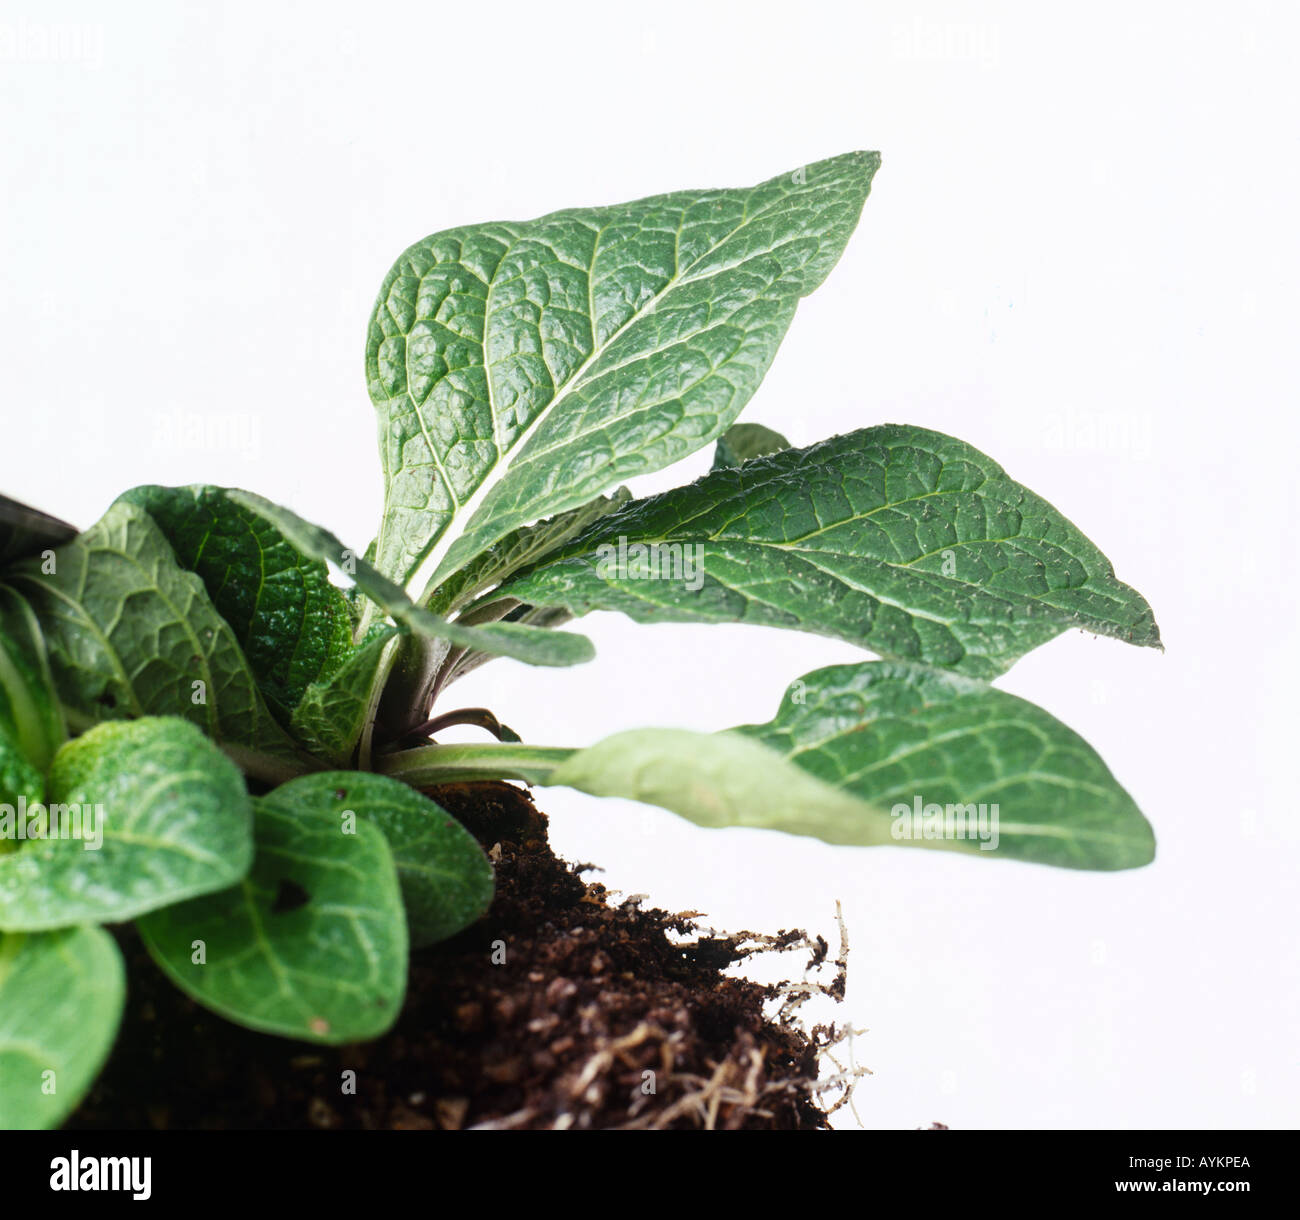 Mandragora officinarum, mandrake, satan's apple, large oval leaves with rough, slightly prickly texture, Stock Photo